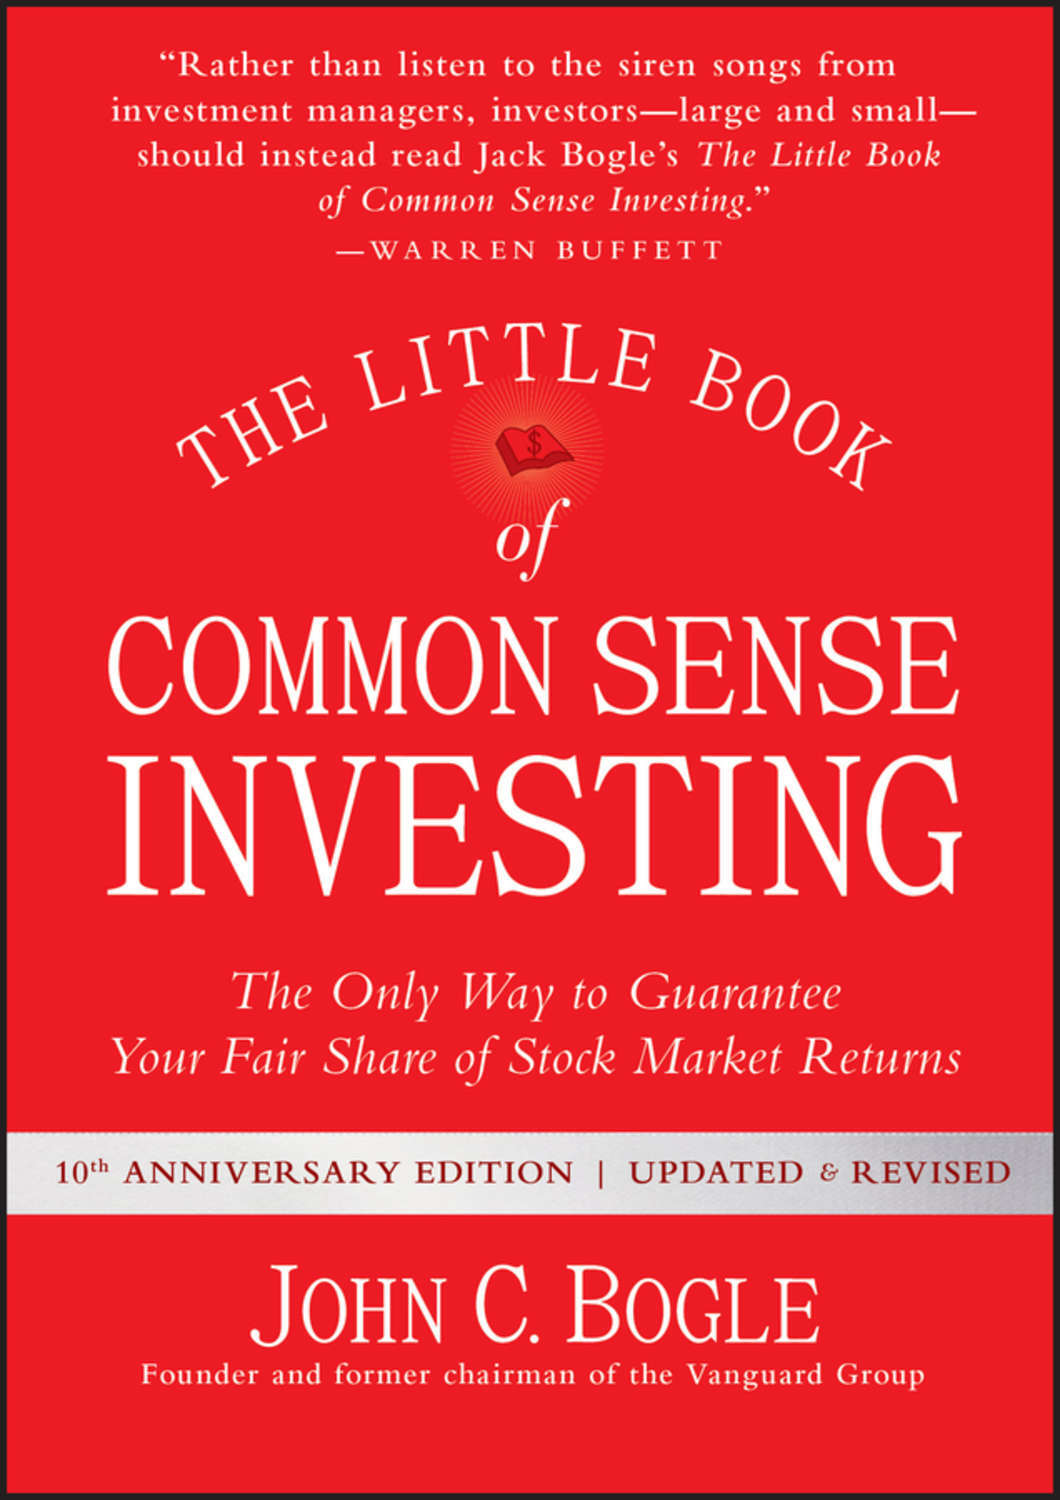 The little book of common sense investing by john bogle real estate investing mentors in albany ny